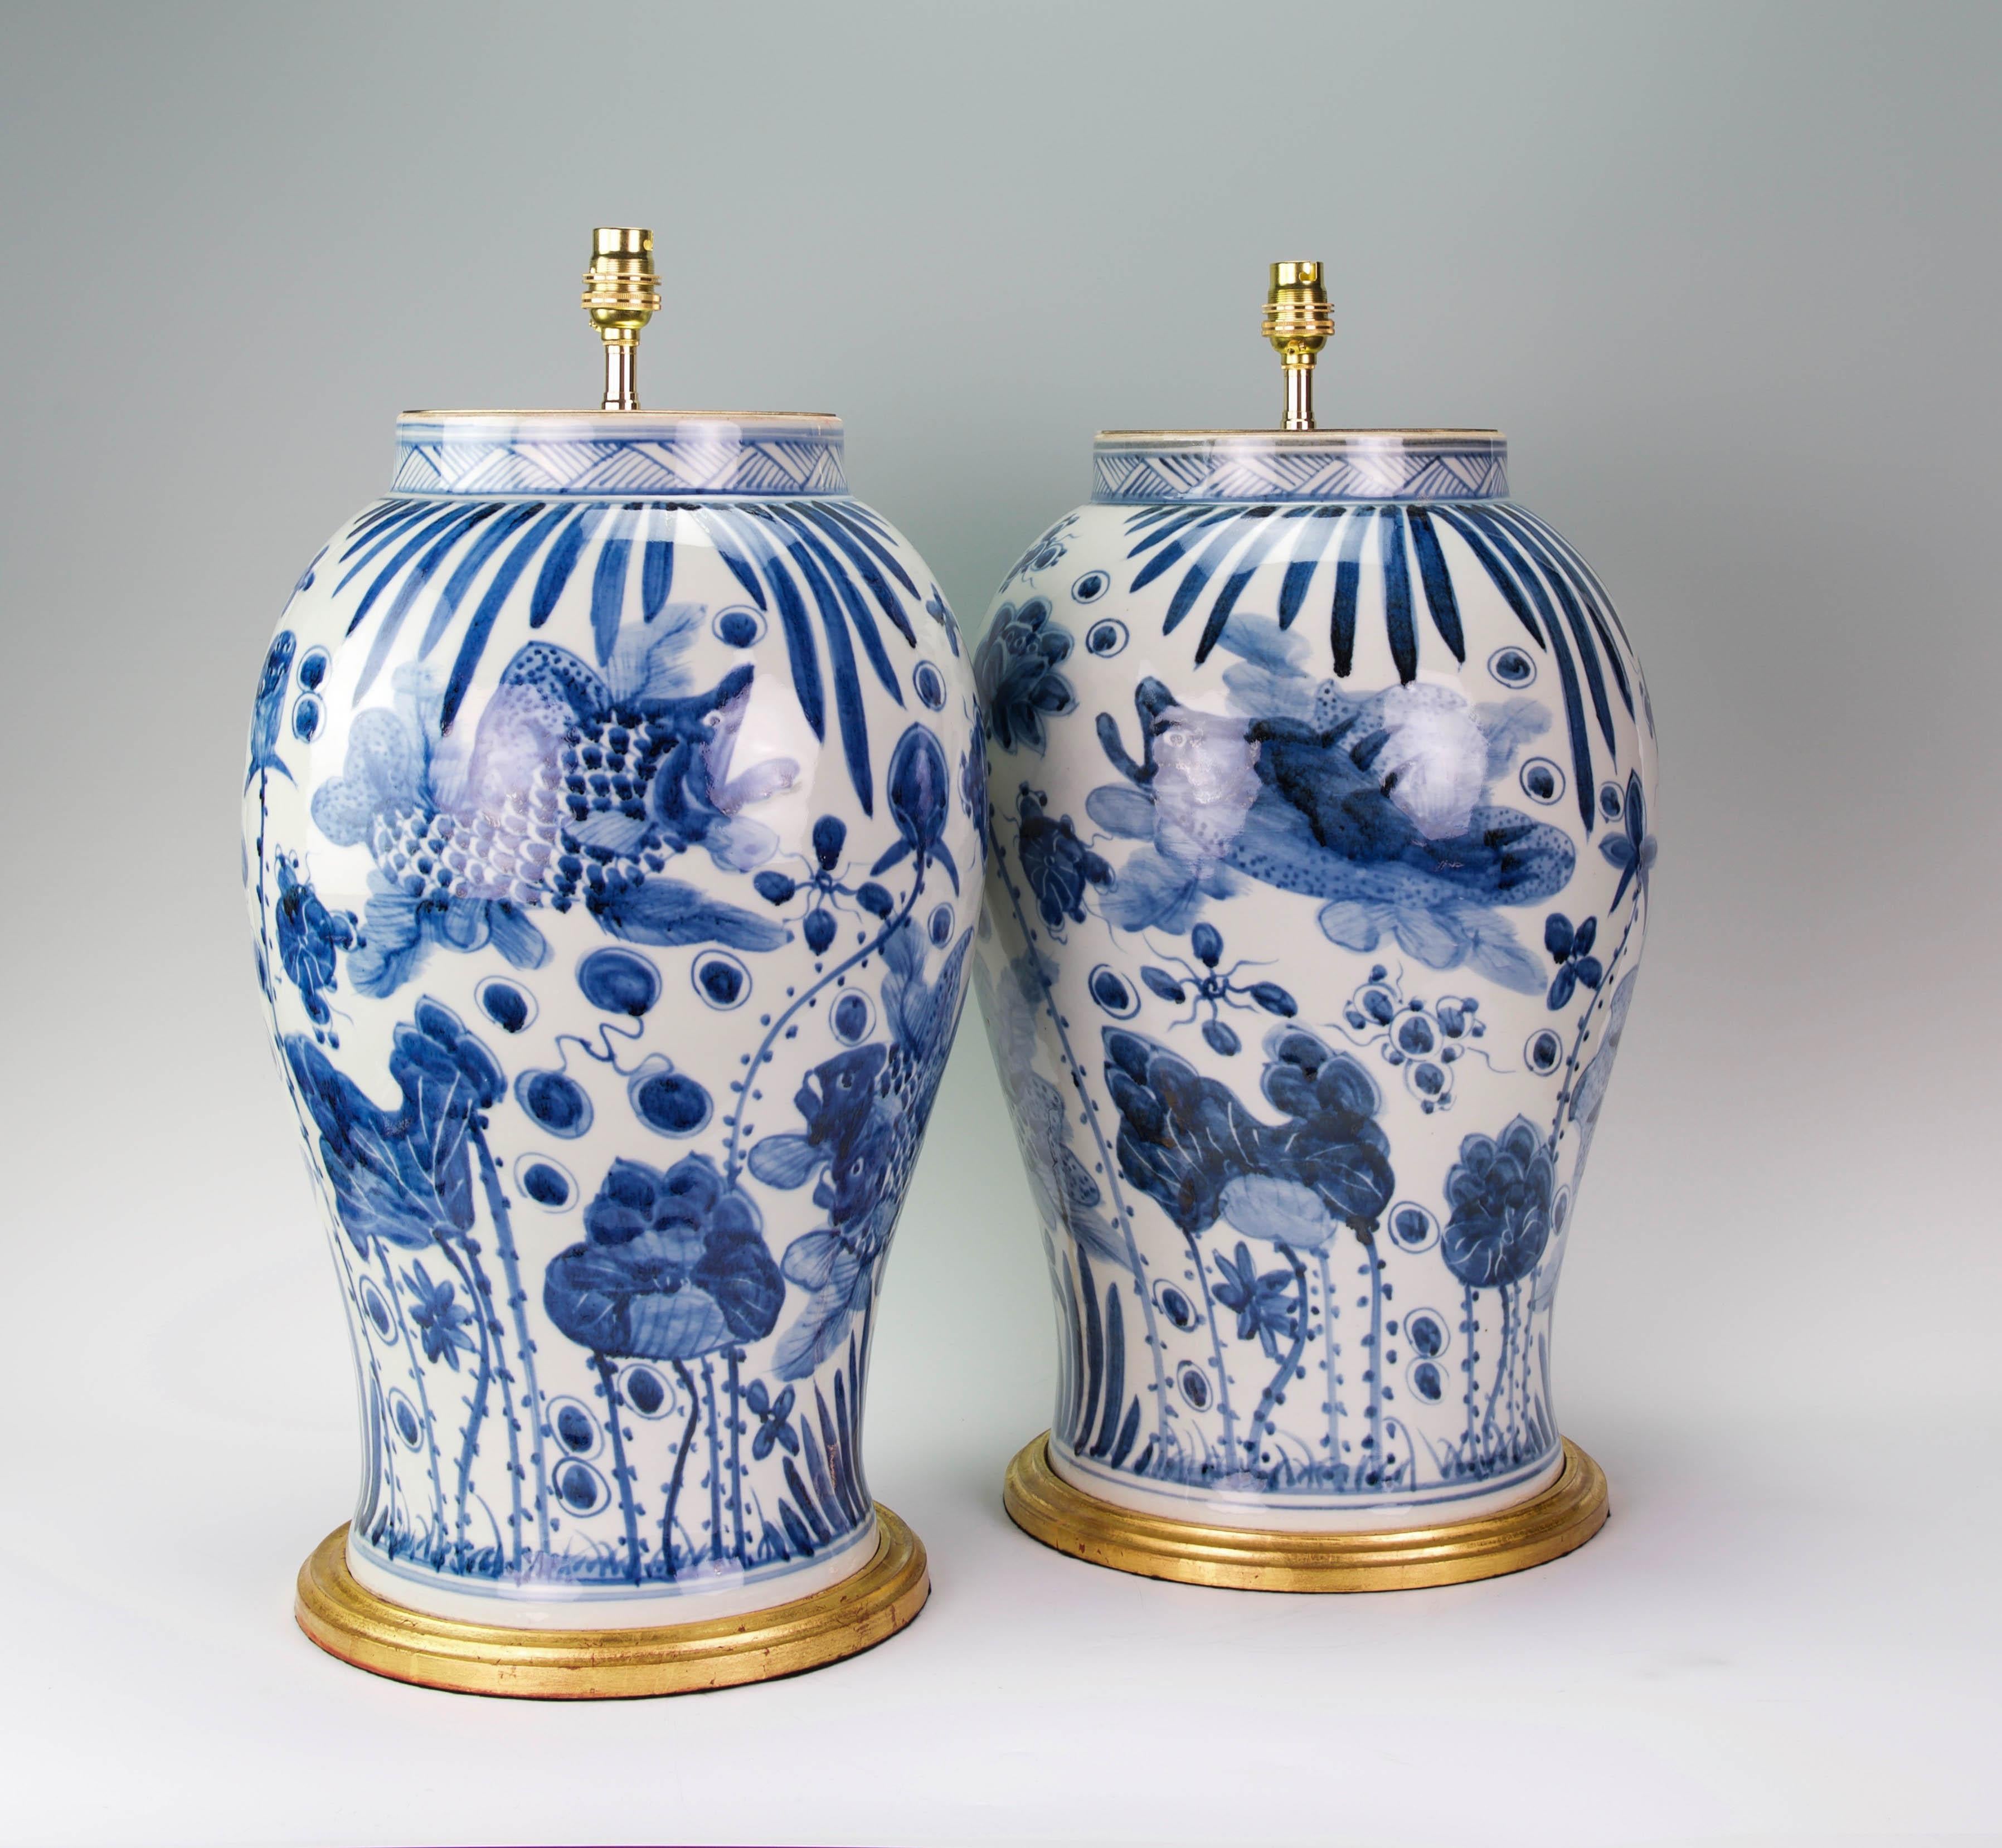 A fine pair of large Chinese blue and white vases decorated throughout in the Kangxi style, with superb fish and aquatic plants in tones of blues on a white ground, now mounted as lamps with hand gilded turned bases.

Height of vases: 18 1/2 in